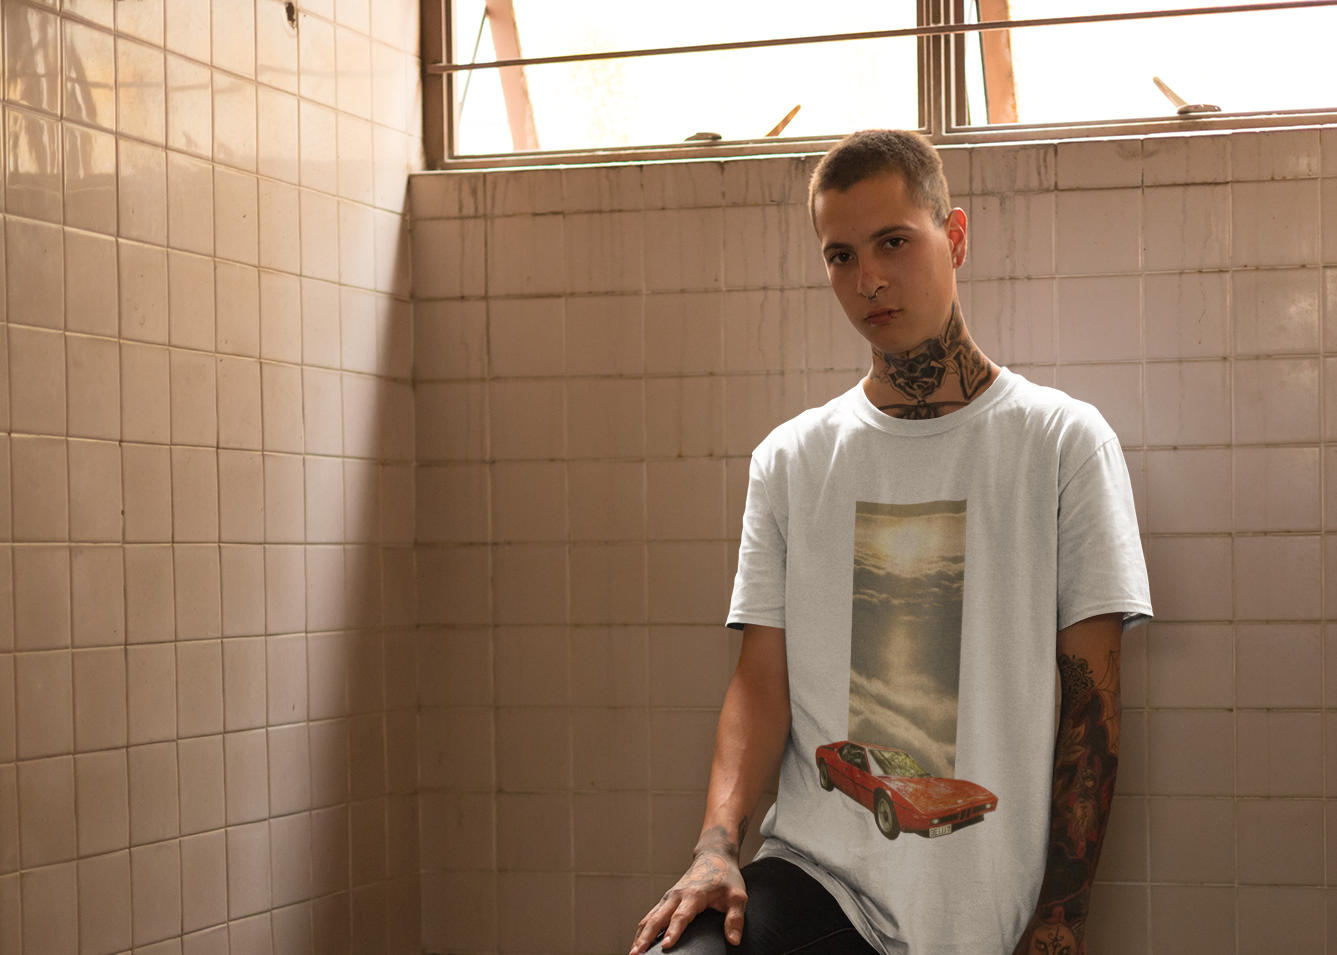 t-shirt-mockup-of-a-punk-man-with-tattoos-leaning-against-a-tiles-wall-23461 copy.png